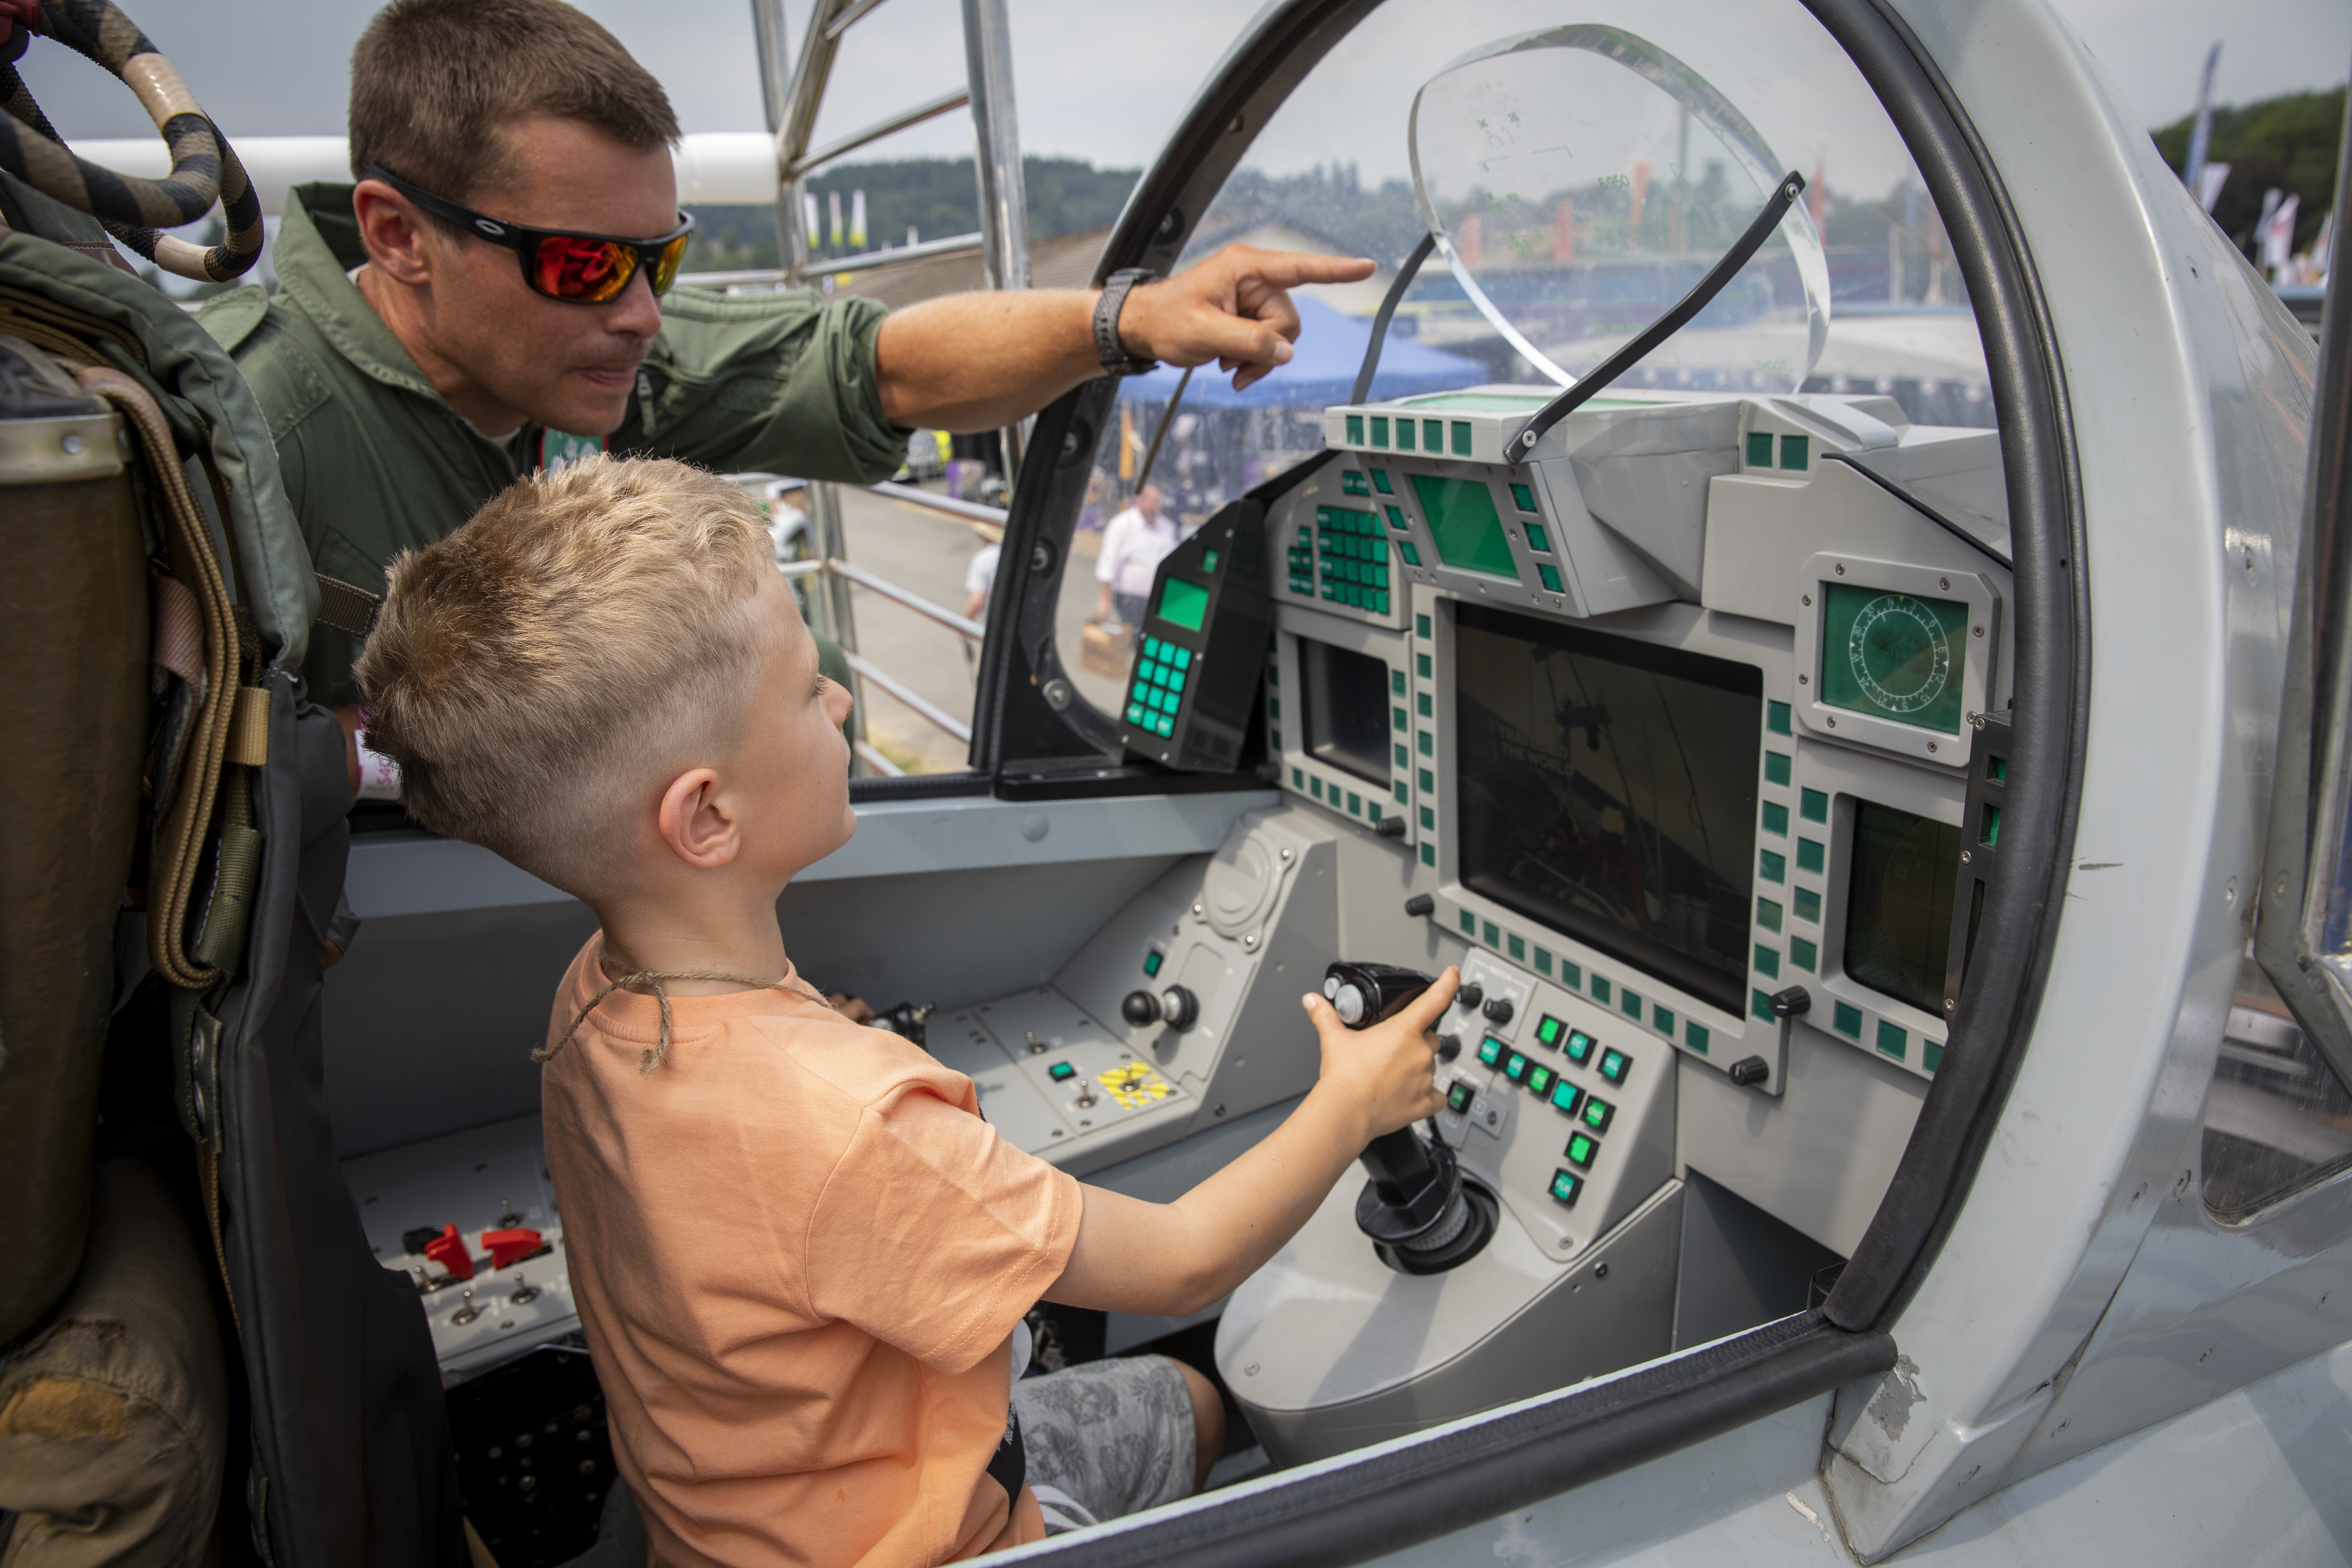 Image shows child in a Typhoon cockpit simulator with RAF aviator pointing to screen.